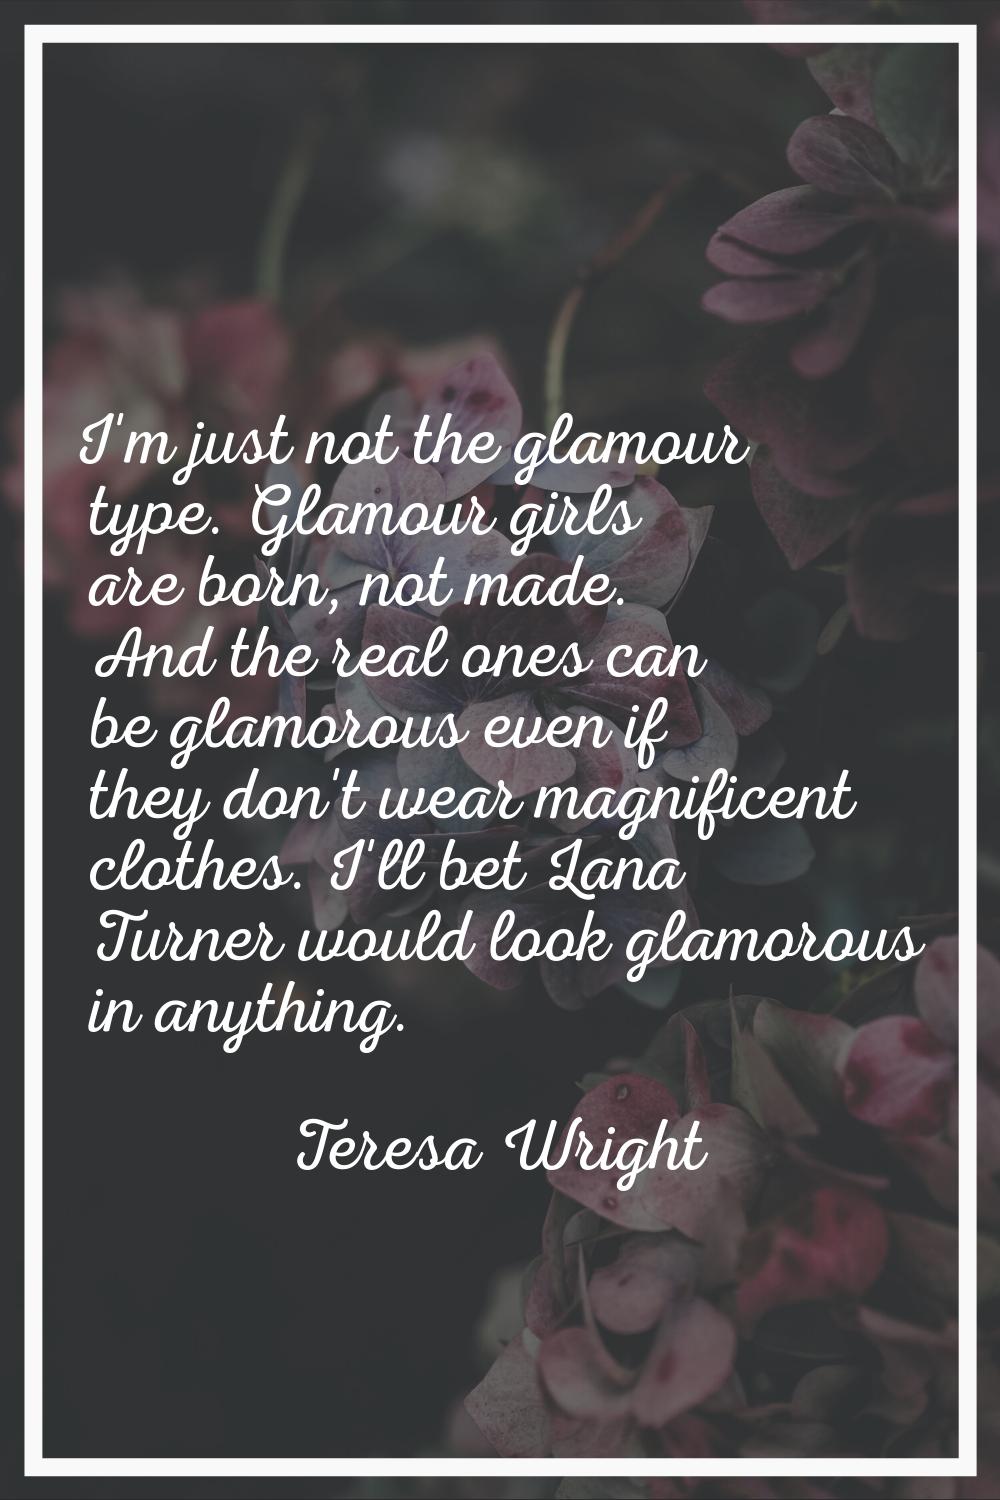 I'm just not the glamour type. Glamour girls are born, not made. And the real ones can be glamorous